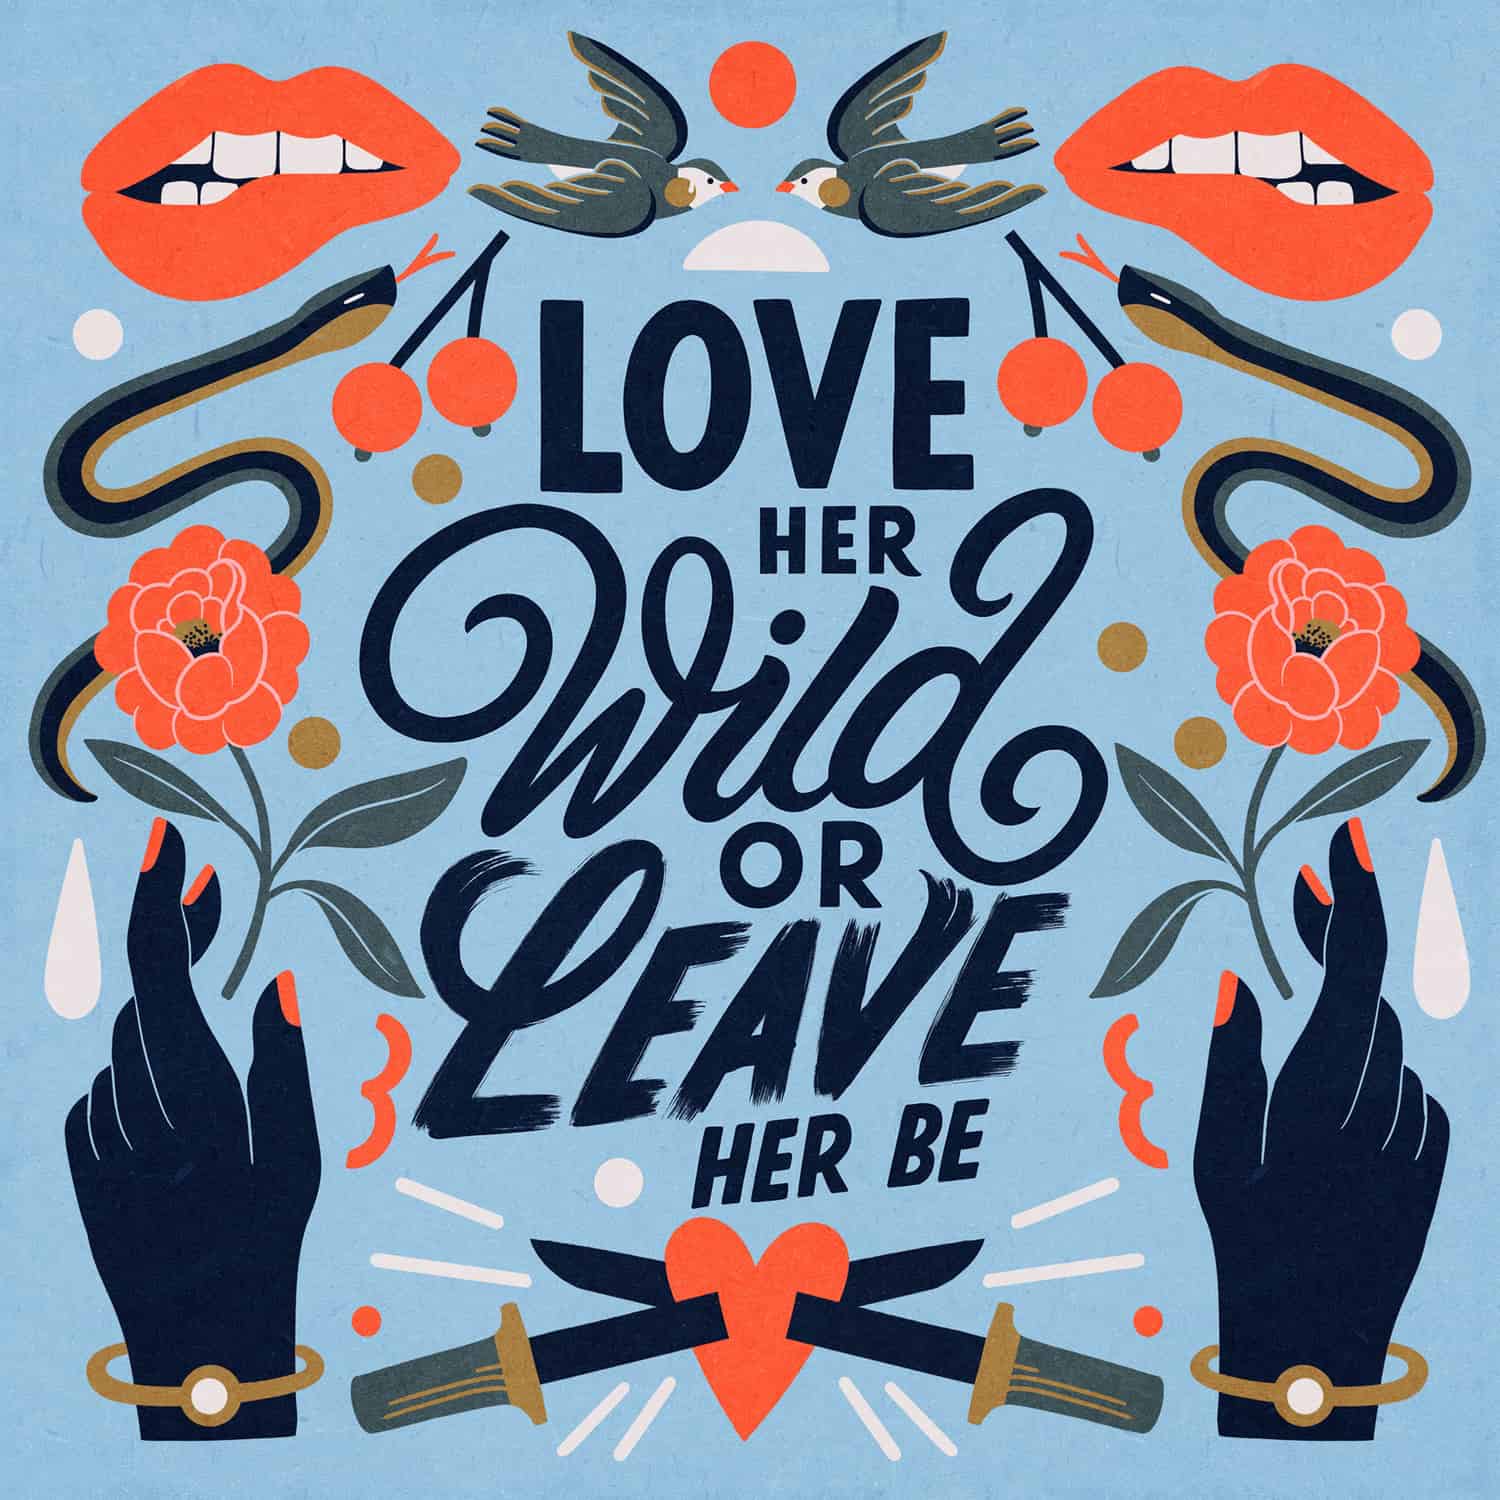 Illustrations by Carmi Grau – Love Her Wild or Leave Her Be